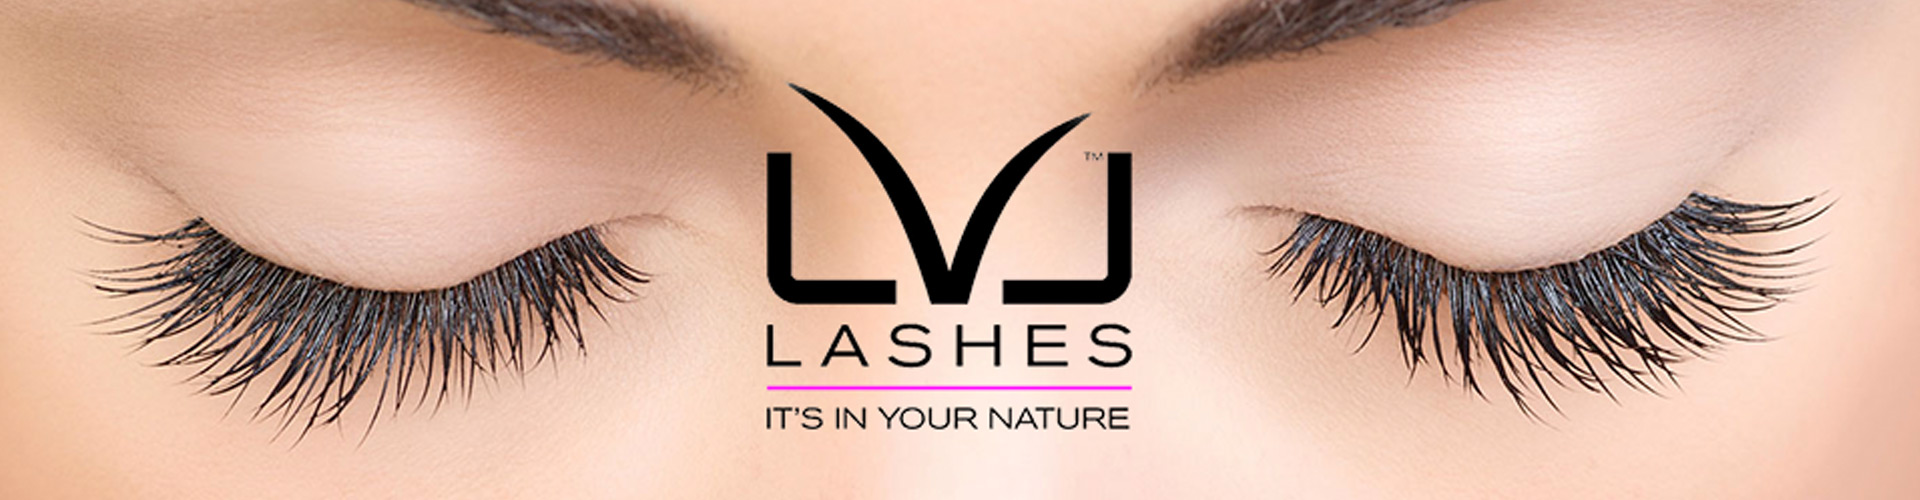 LVL Lashes Flawless Faces | Stamford Clinic